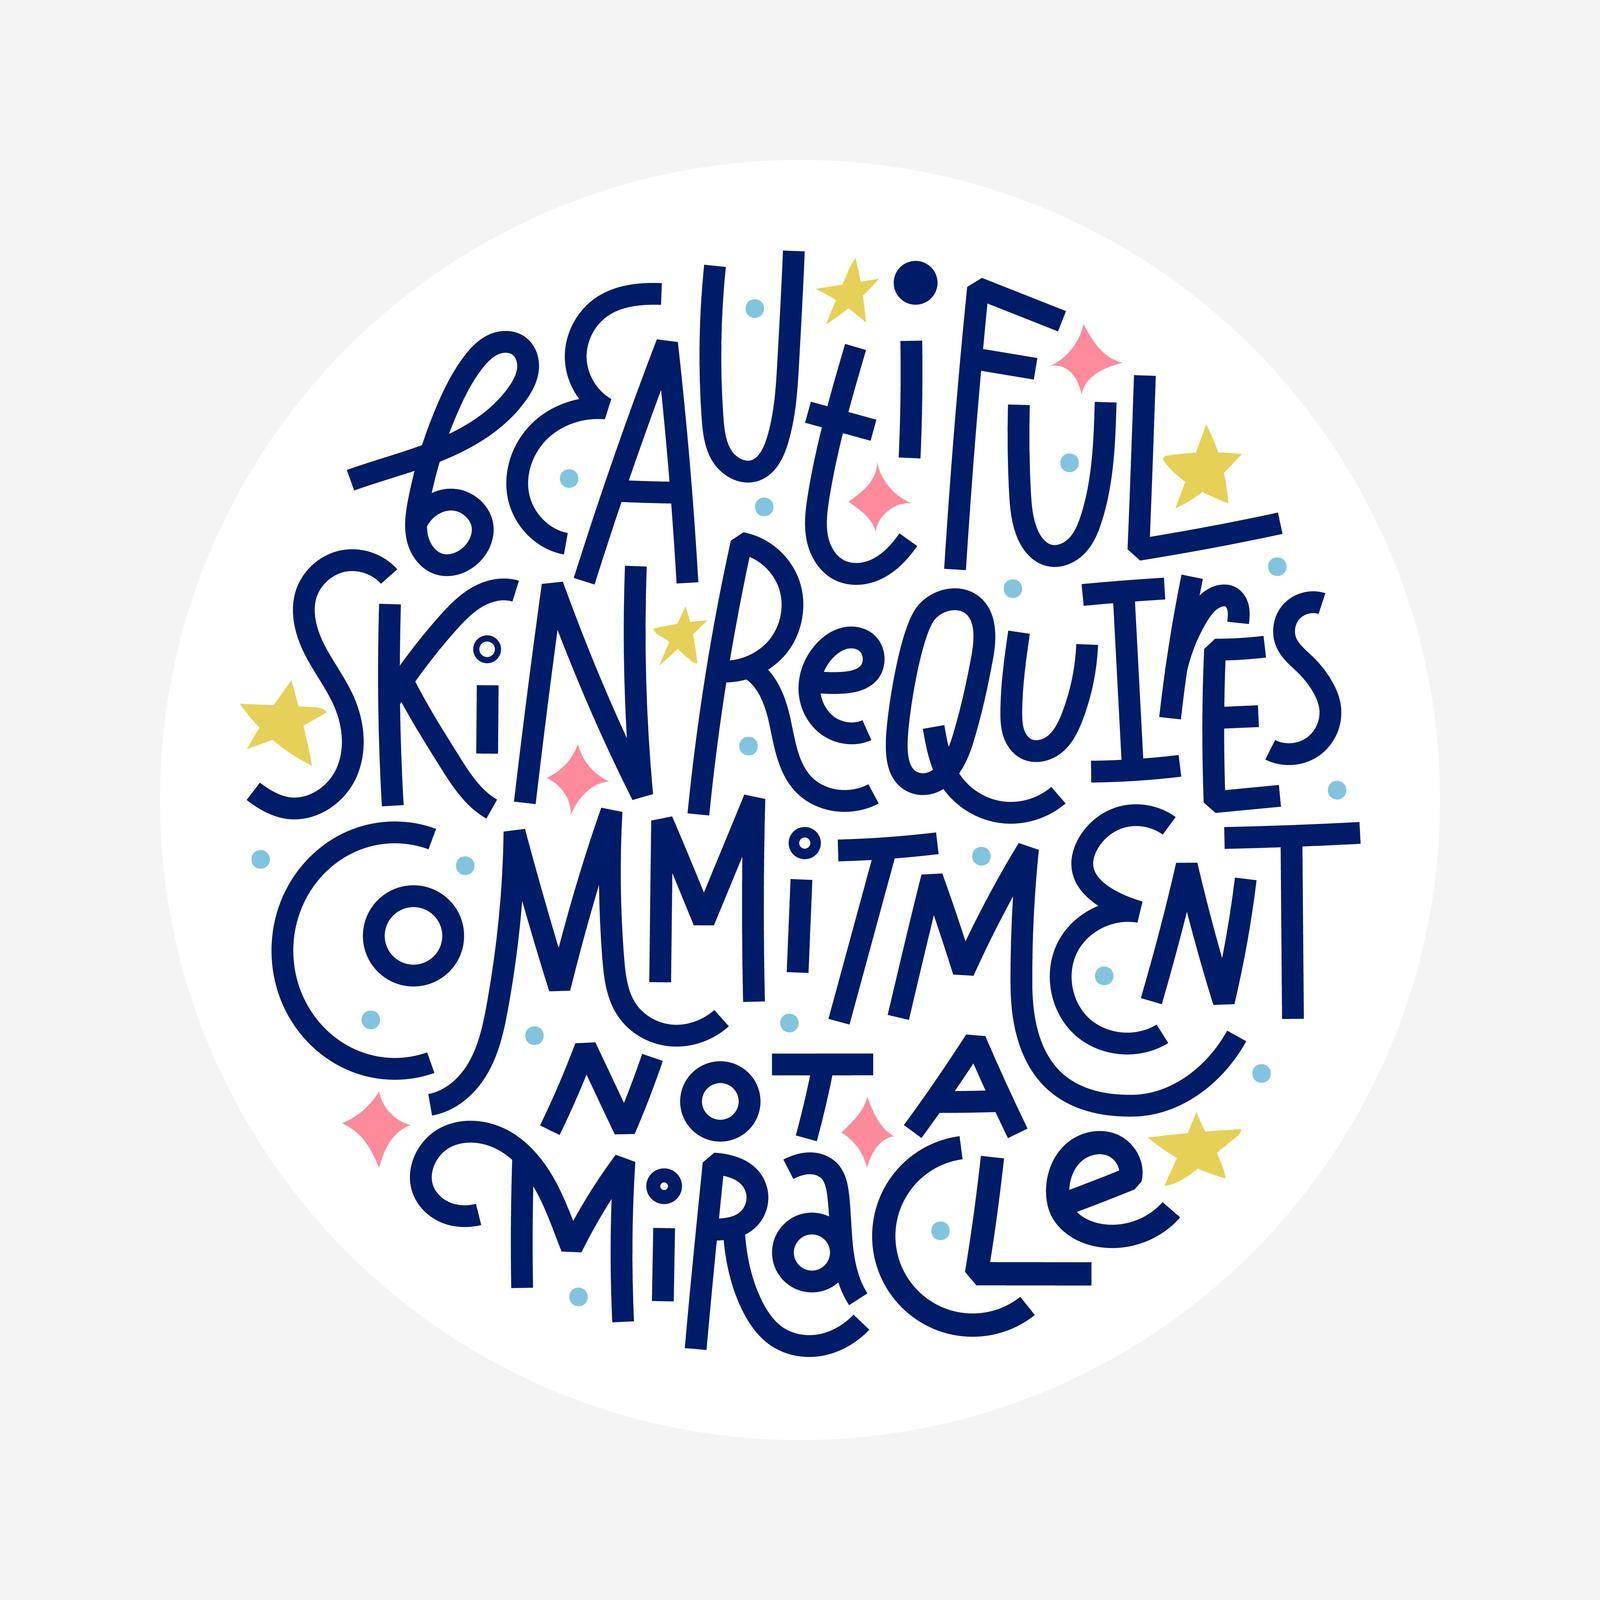 Beautiful skin requires commitment, not a miracle by chickfishdoodles